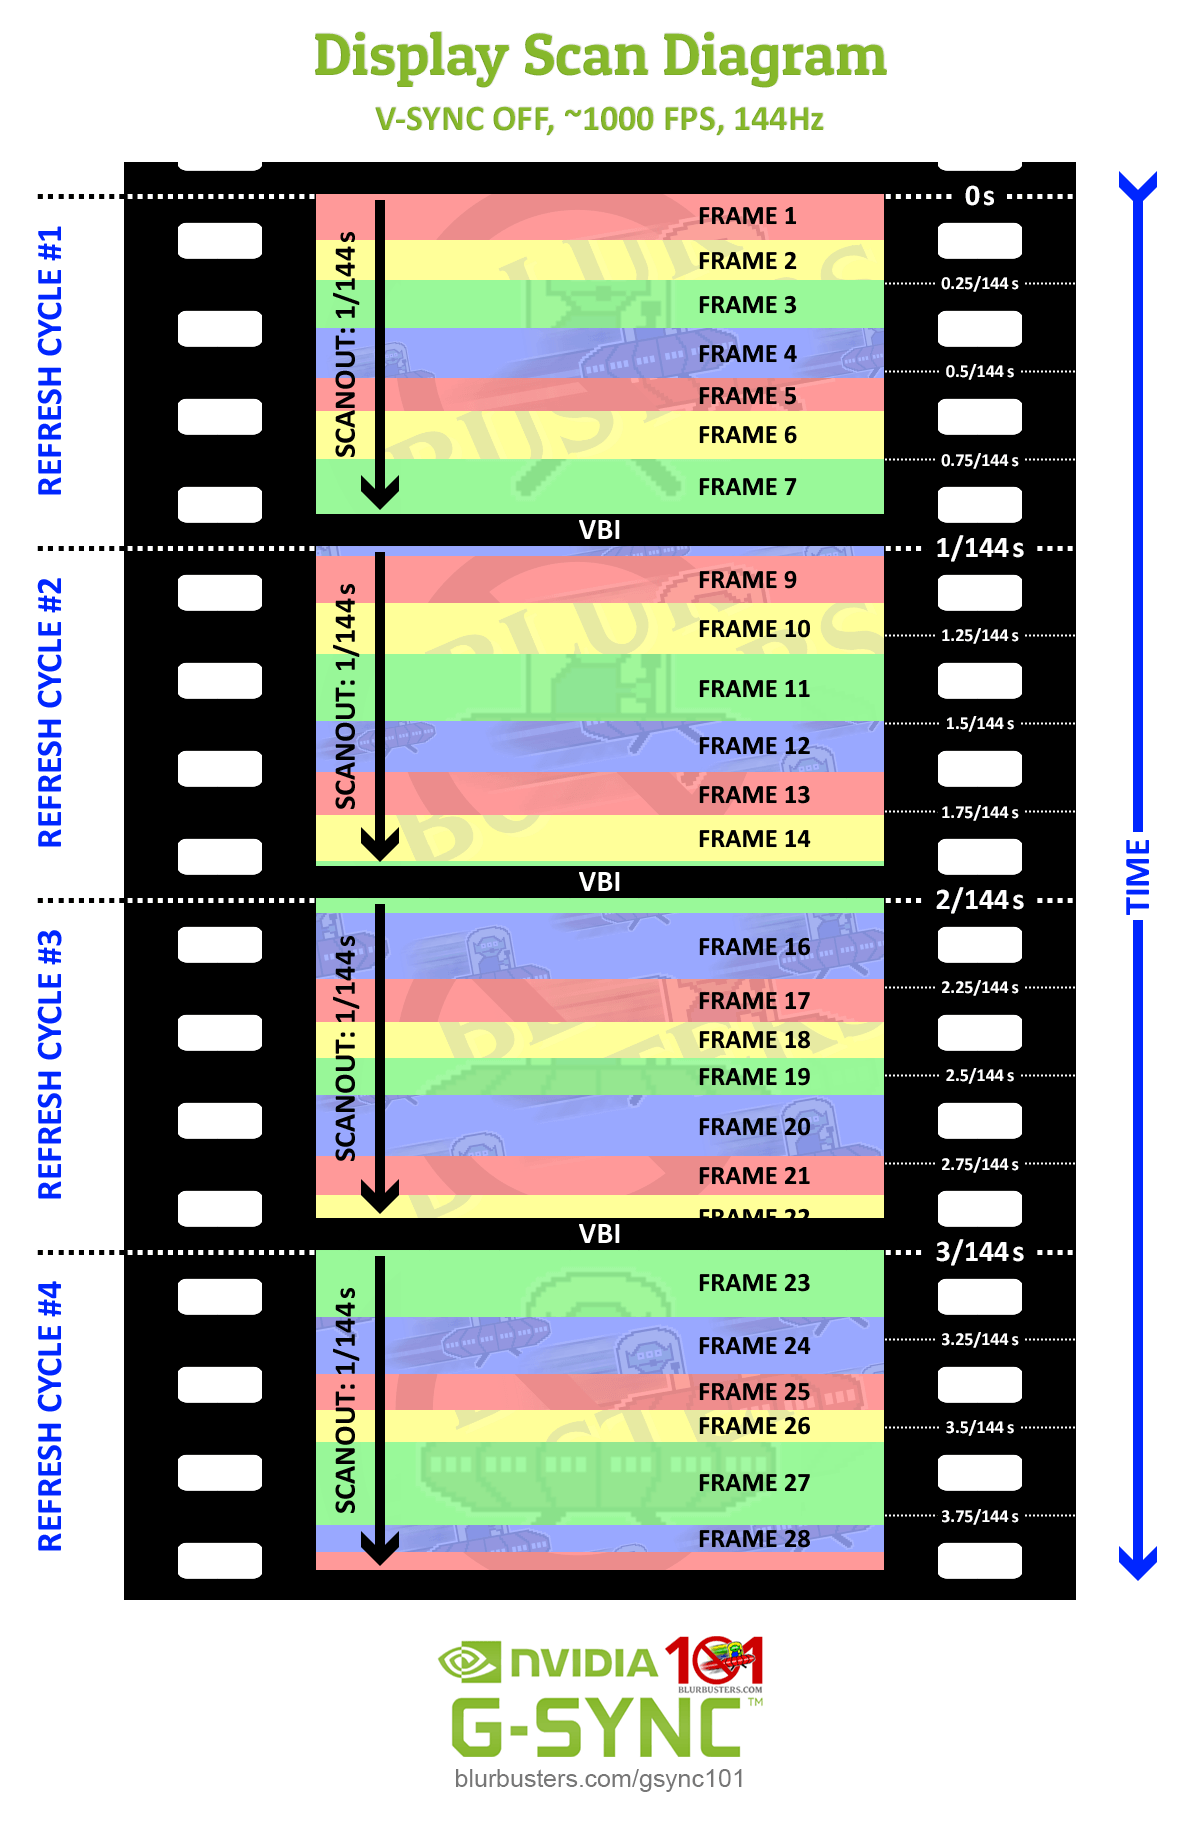 An example of multiple frames per scanout